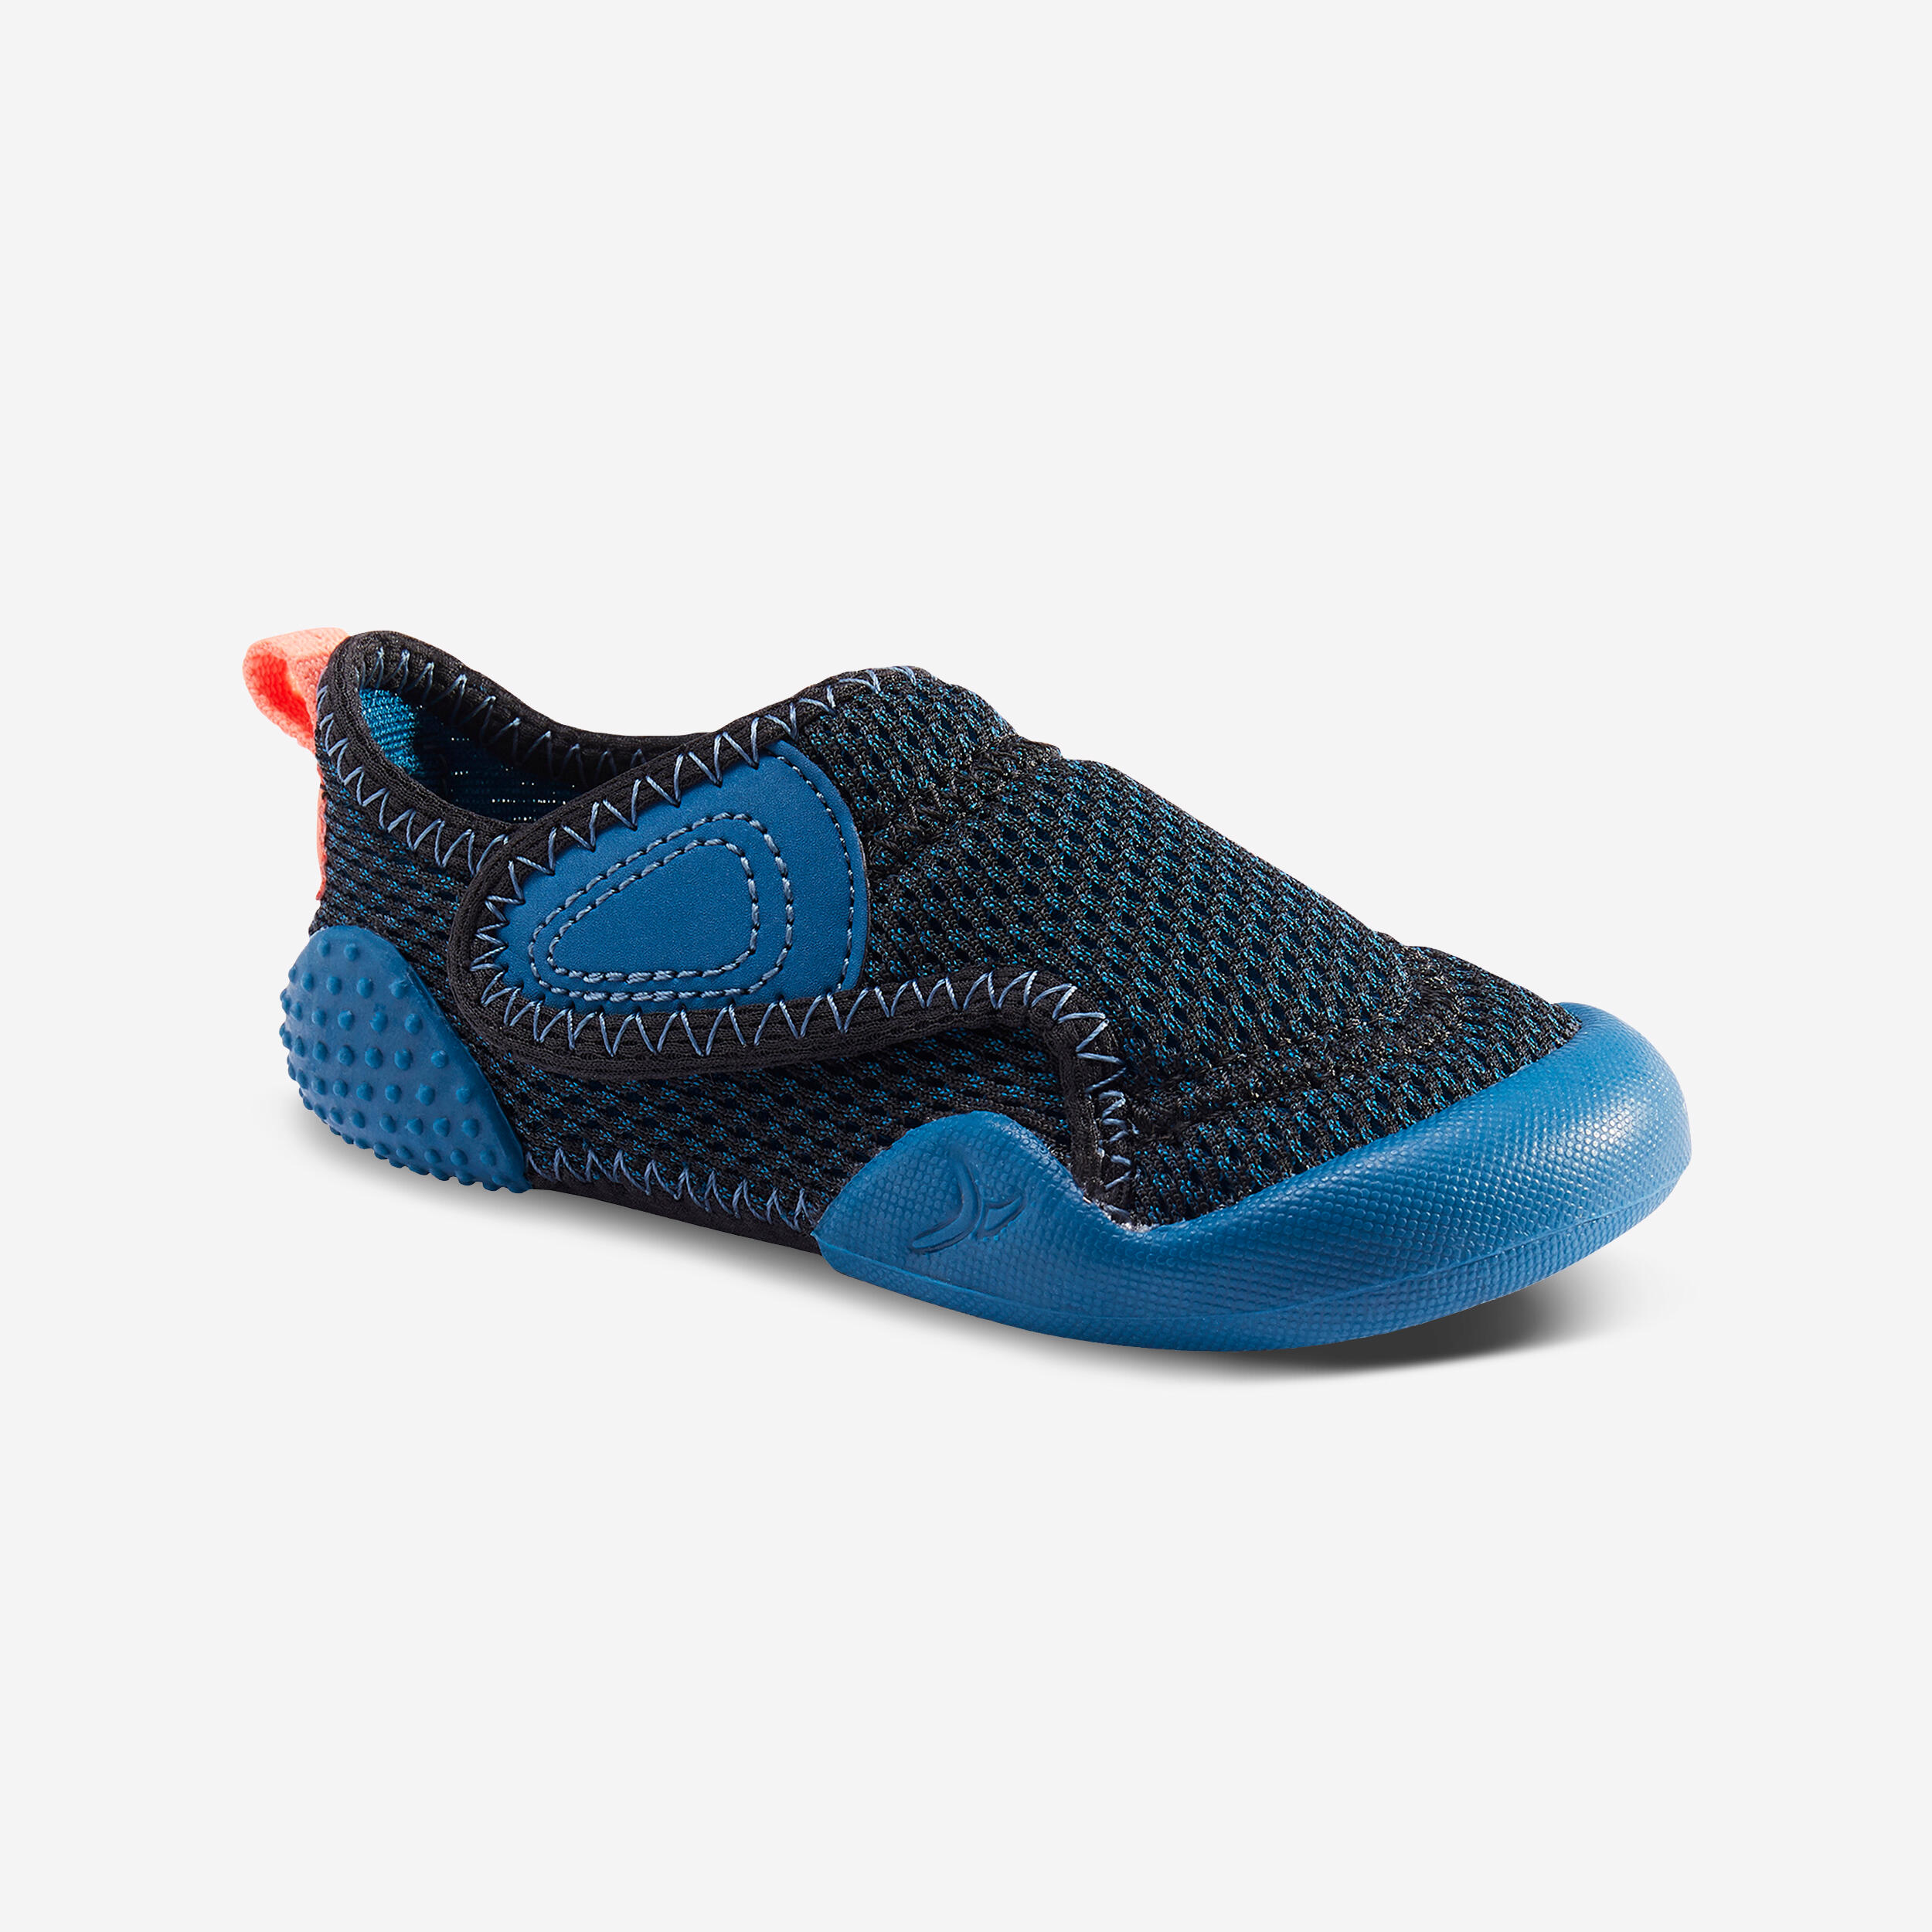 DOMYOS Kids' Non-Slip and Breathable Bootee - Blue